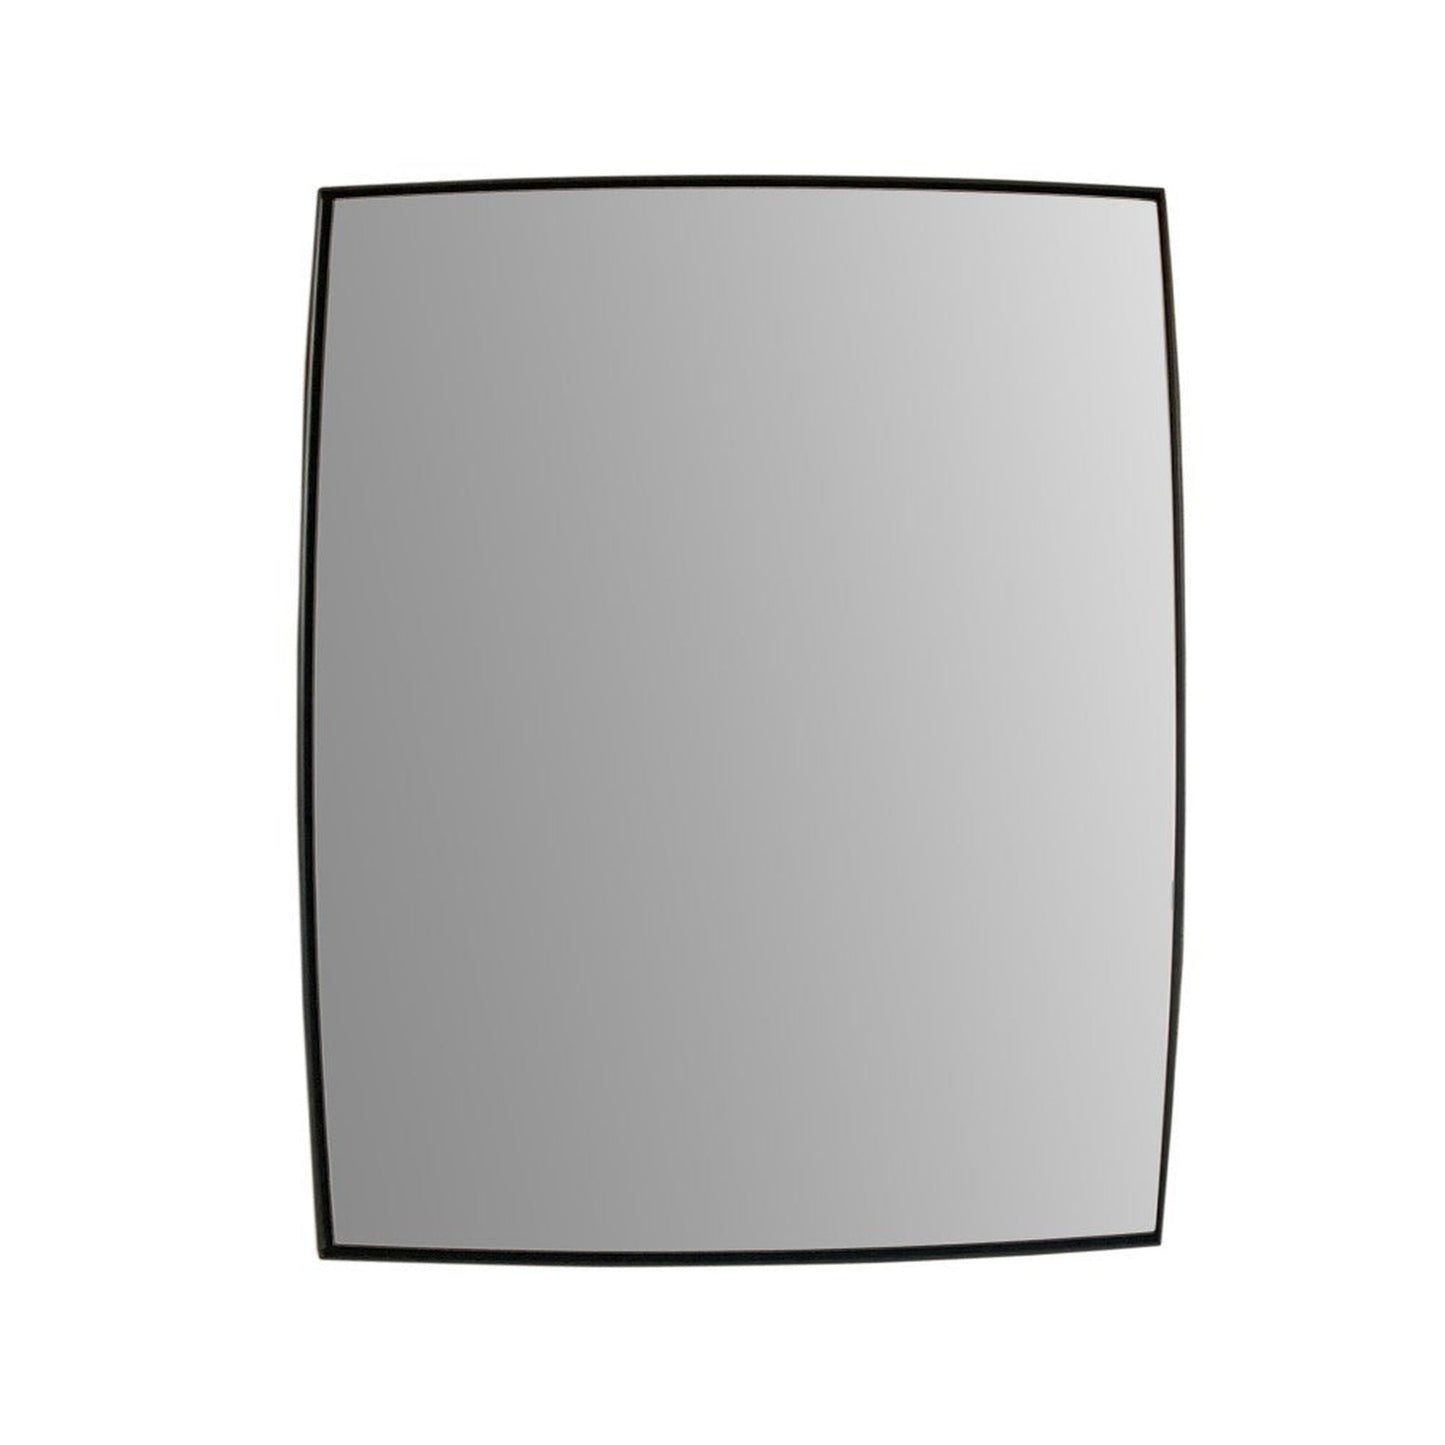 Bellaterra Home 24" x 31" Black Rectangle Wall-Mounted Steel Framed Mirror